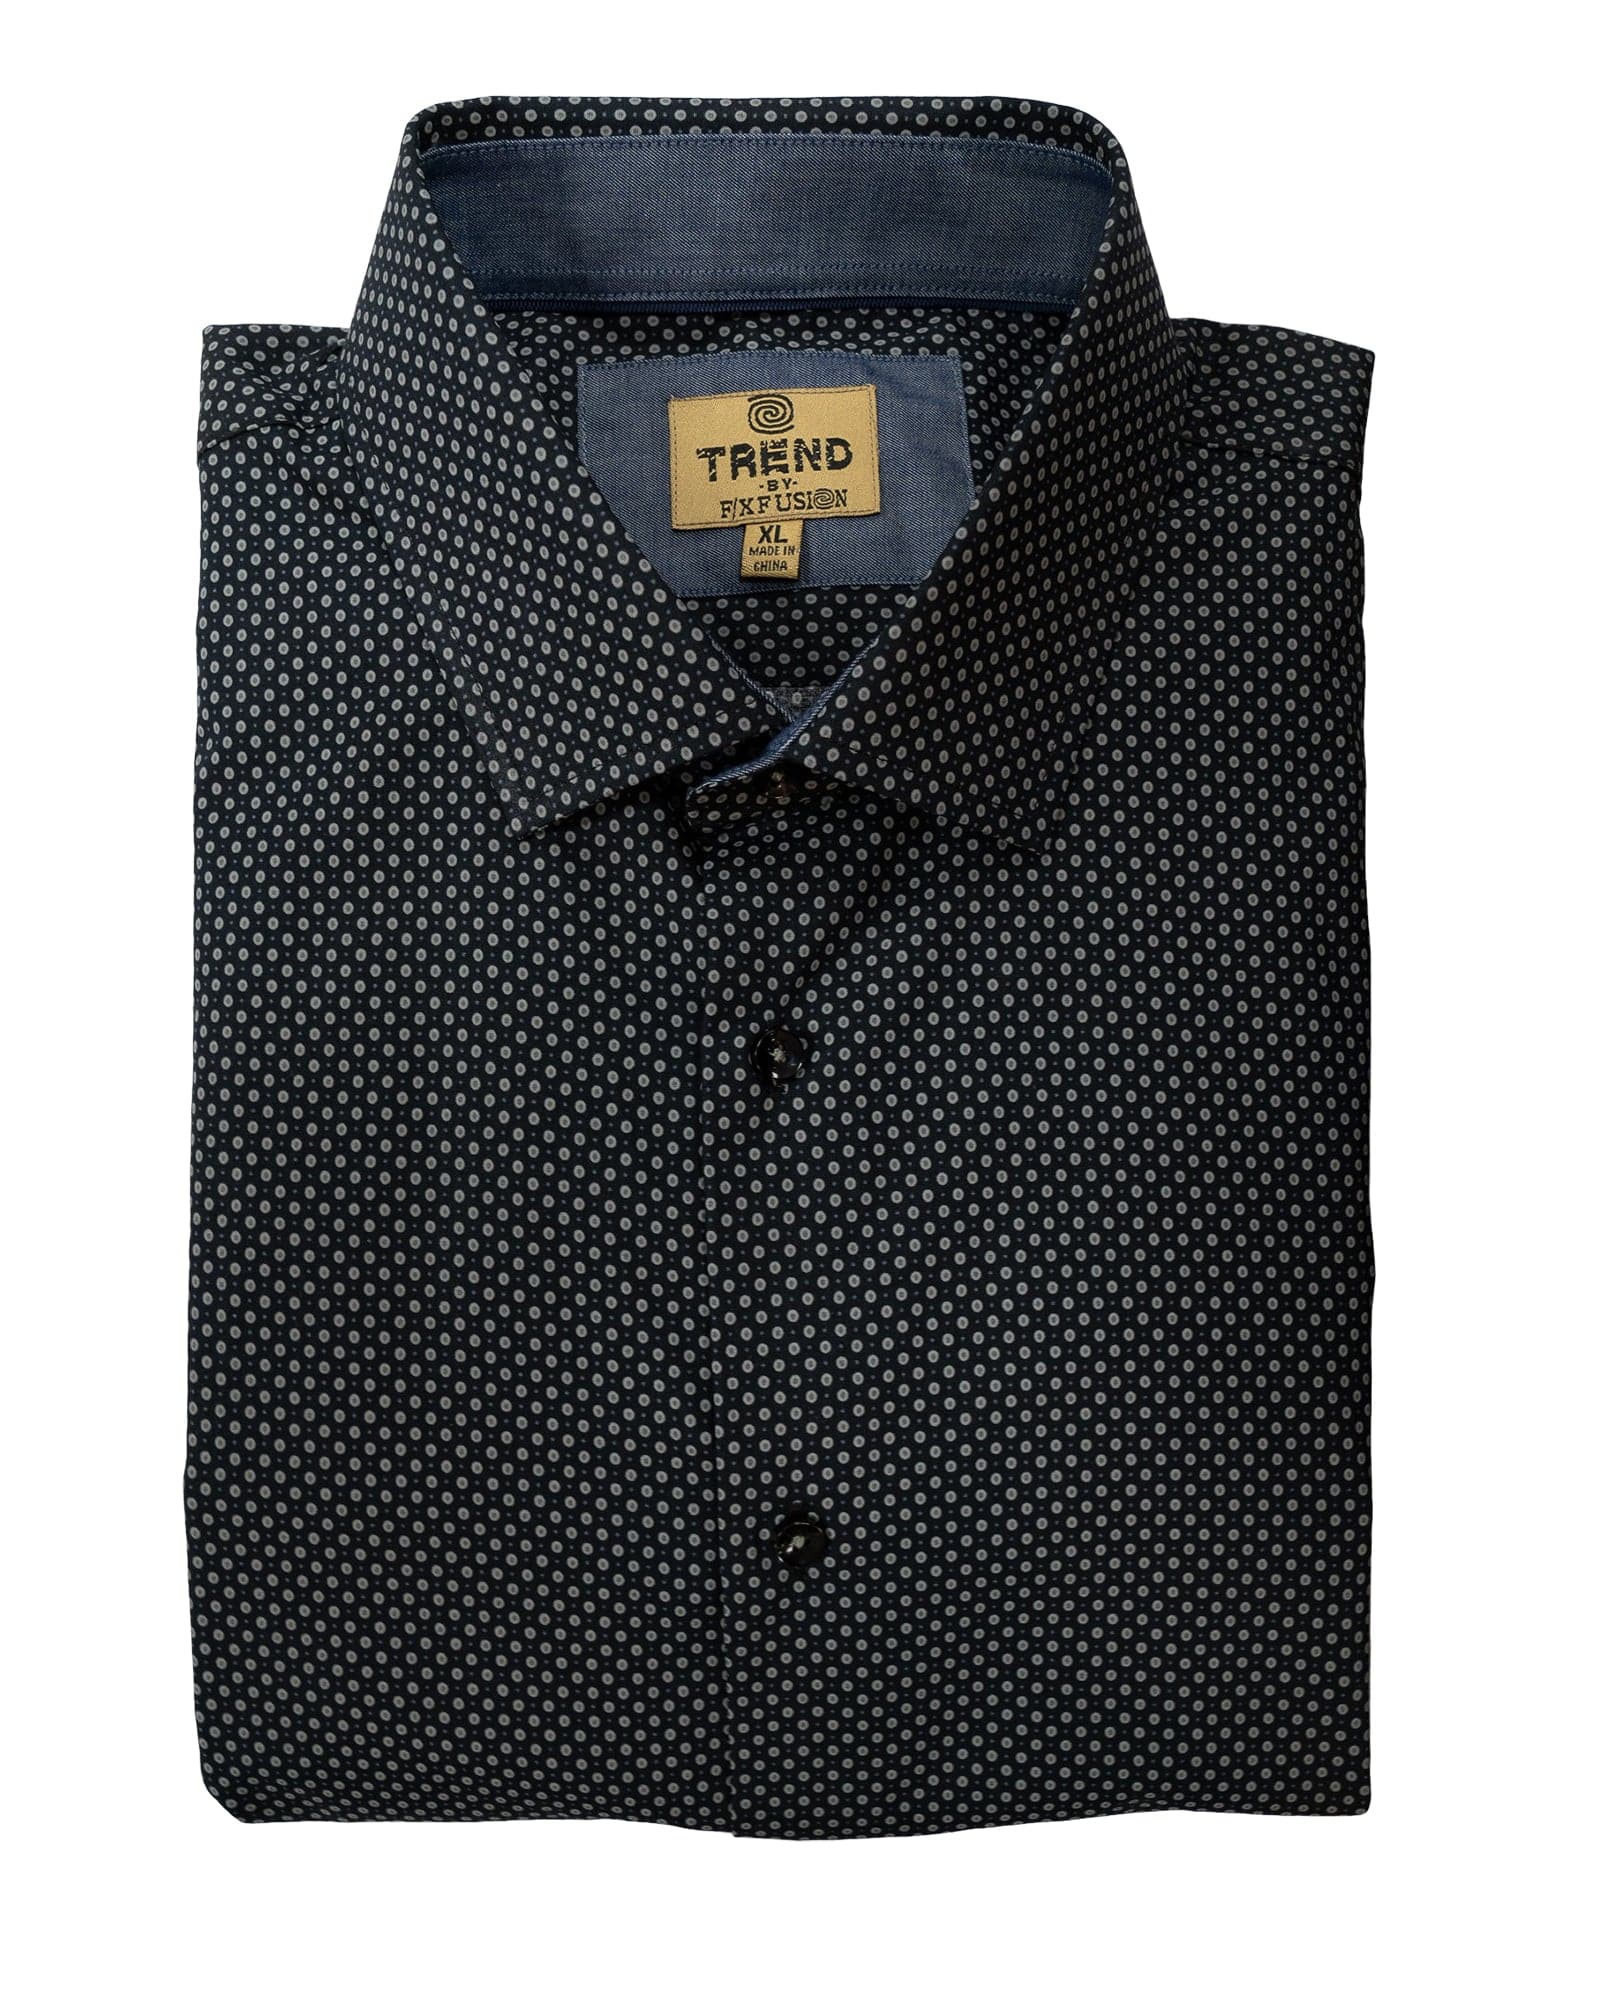 Trend by F/X Fusion Black and Grey Circle Print Sport Shirt - Rainwater's Men's Clothing and Tuxedo Rental